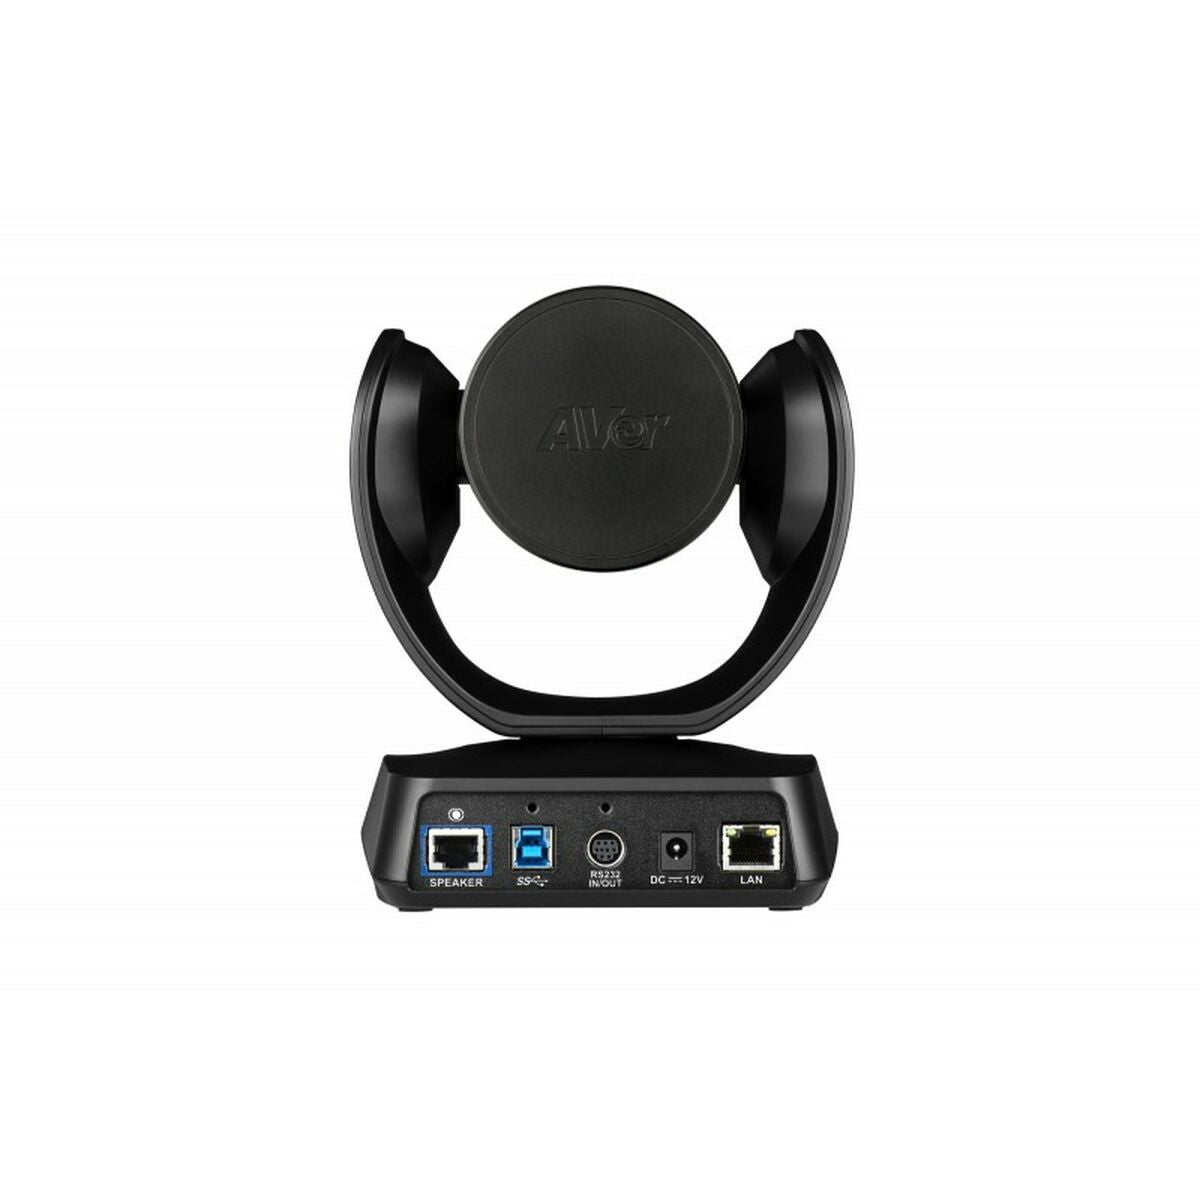 Video Conferencing System AVer VC520 Pro2, AVer, Computing, Accessories, video-conferencing-system-aver-vc520-pro2, Brand_AVer, category-reference-2609, category-reference-2642, category-reference-2844, category-reference-t-19685, category-reference-t-19908, category-reference-t-21340, category-reference-t-25568, computers / peripherals, Condition_NEW, office, Price_+ 1000, Teleworking, RiotNook